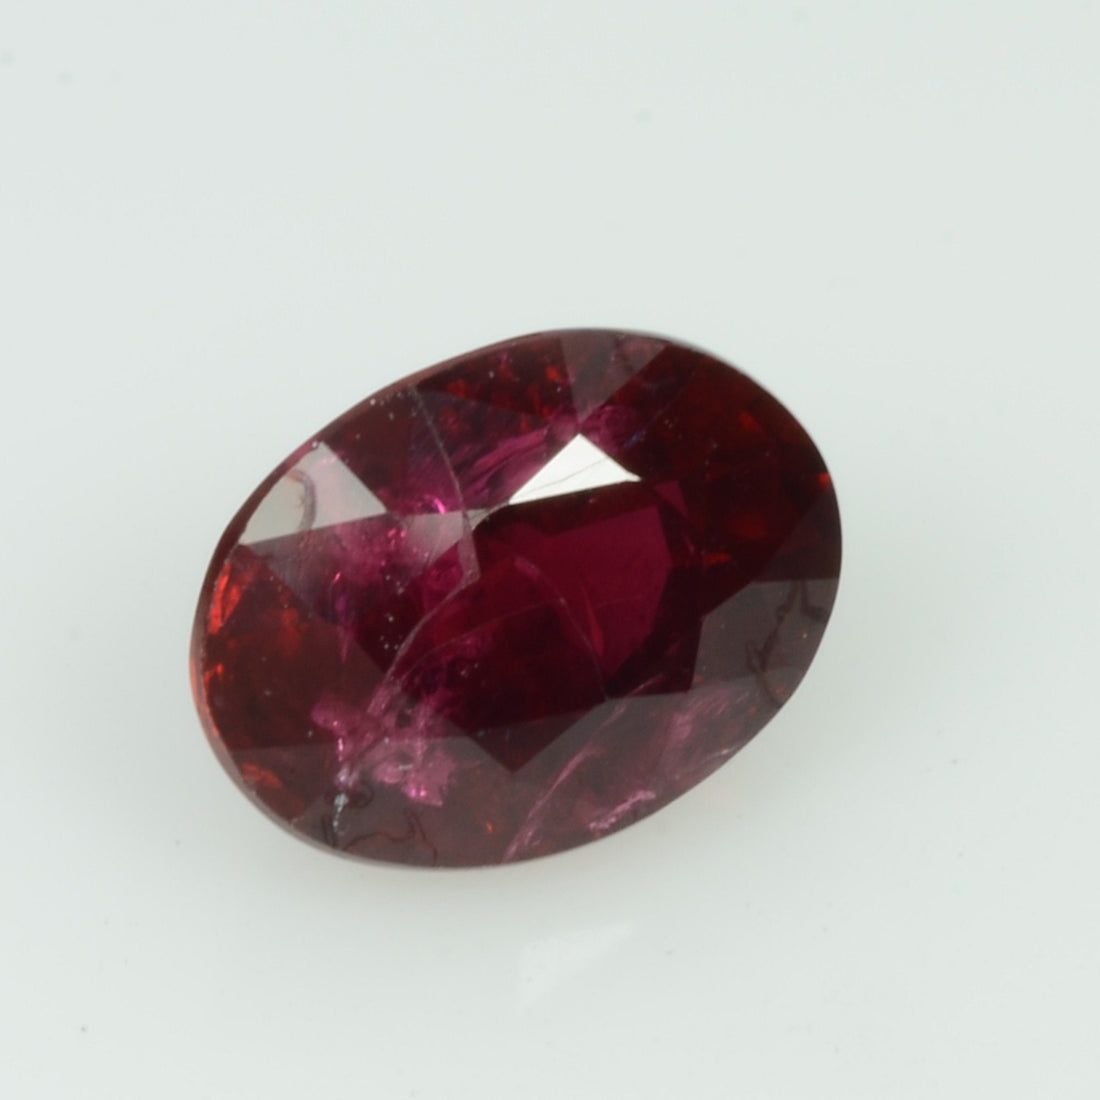 1.76 cts Natural Ruby Loose Gemstone Oval Cut